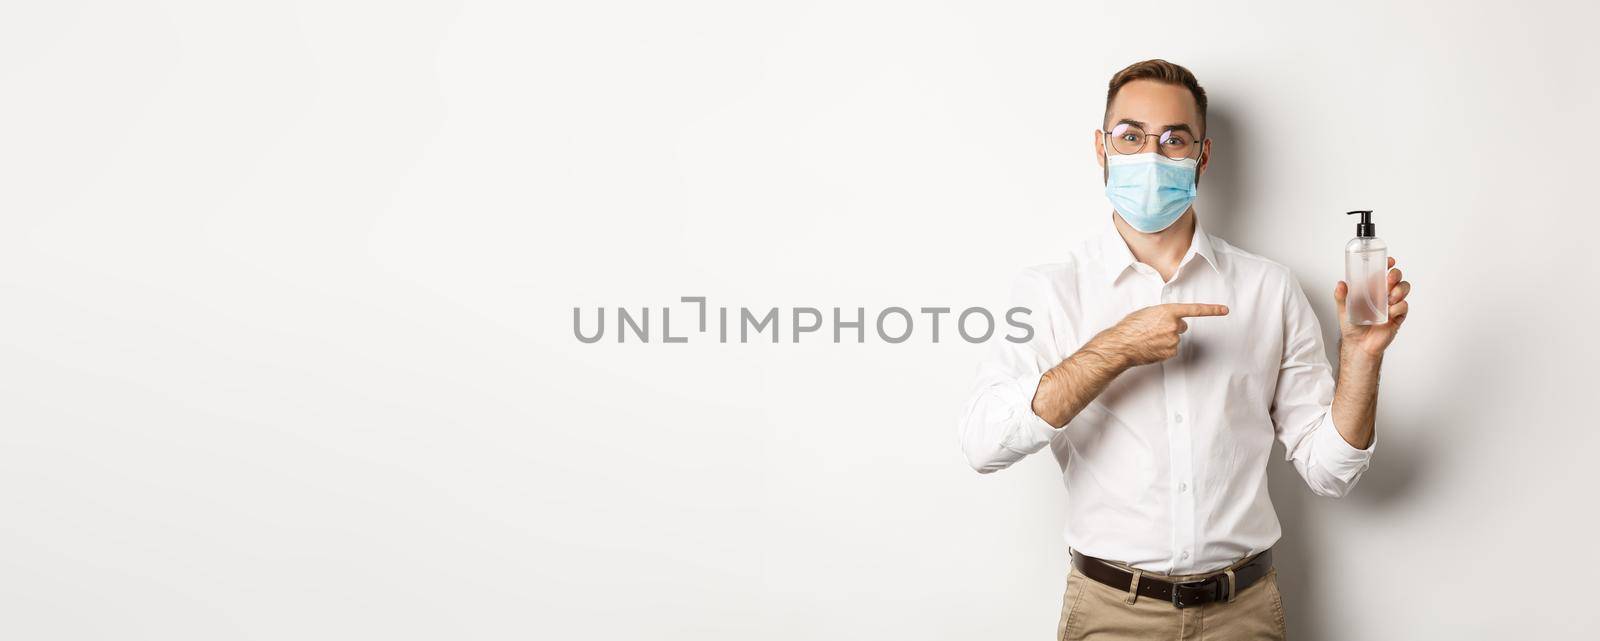 Covid-19, social distancing and quarantine concept. Office worker in medical mask pointing at hand sanitizer, showing antiseptic, white background.